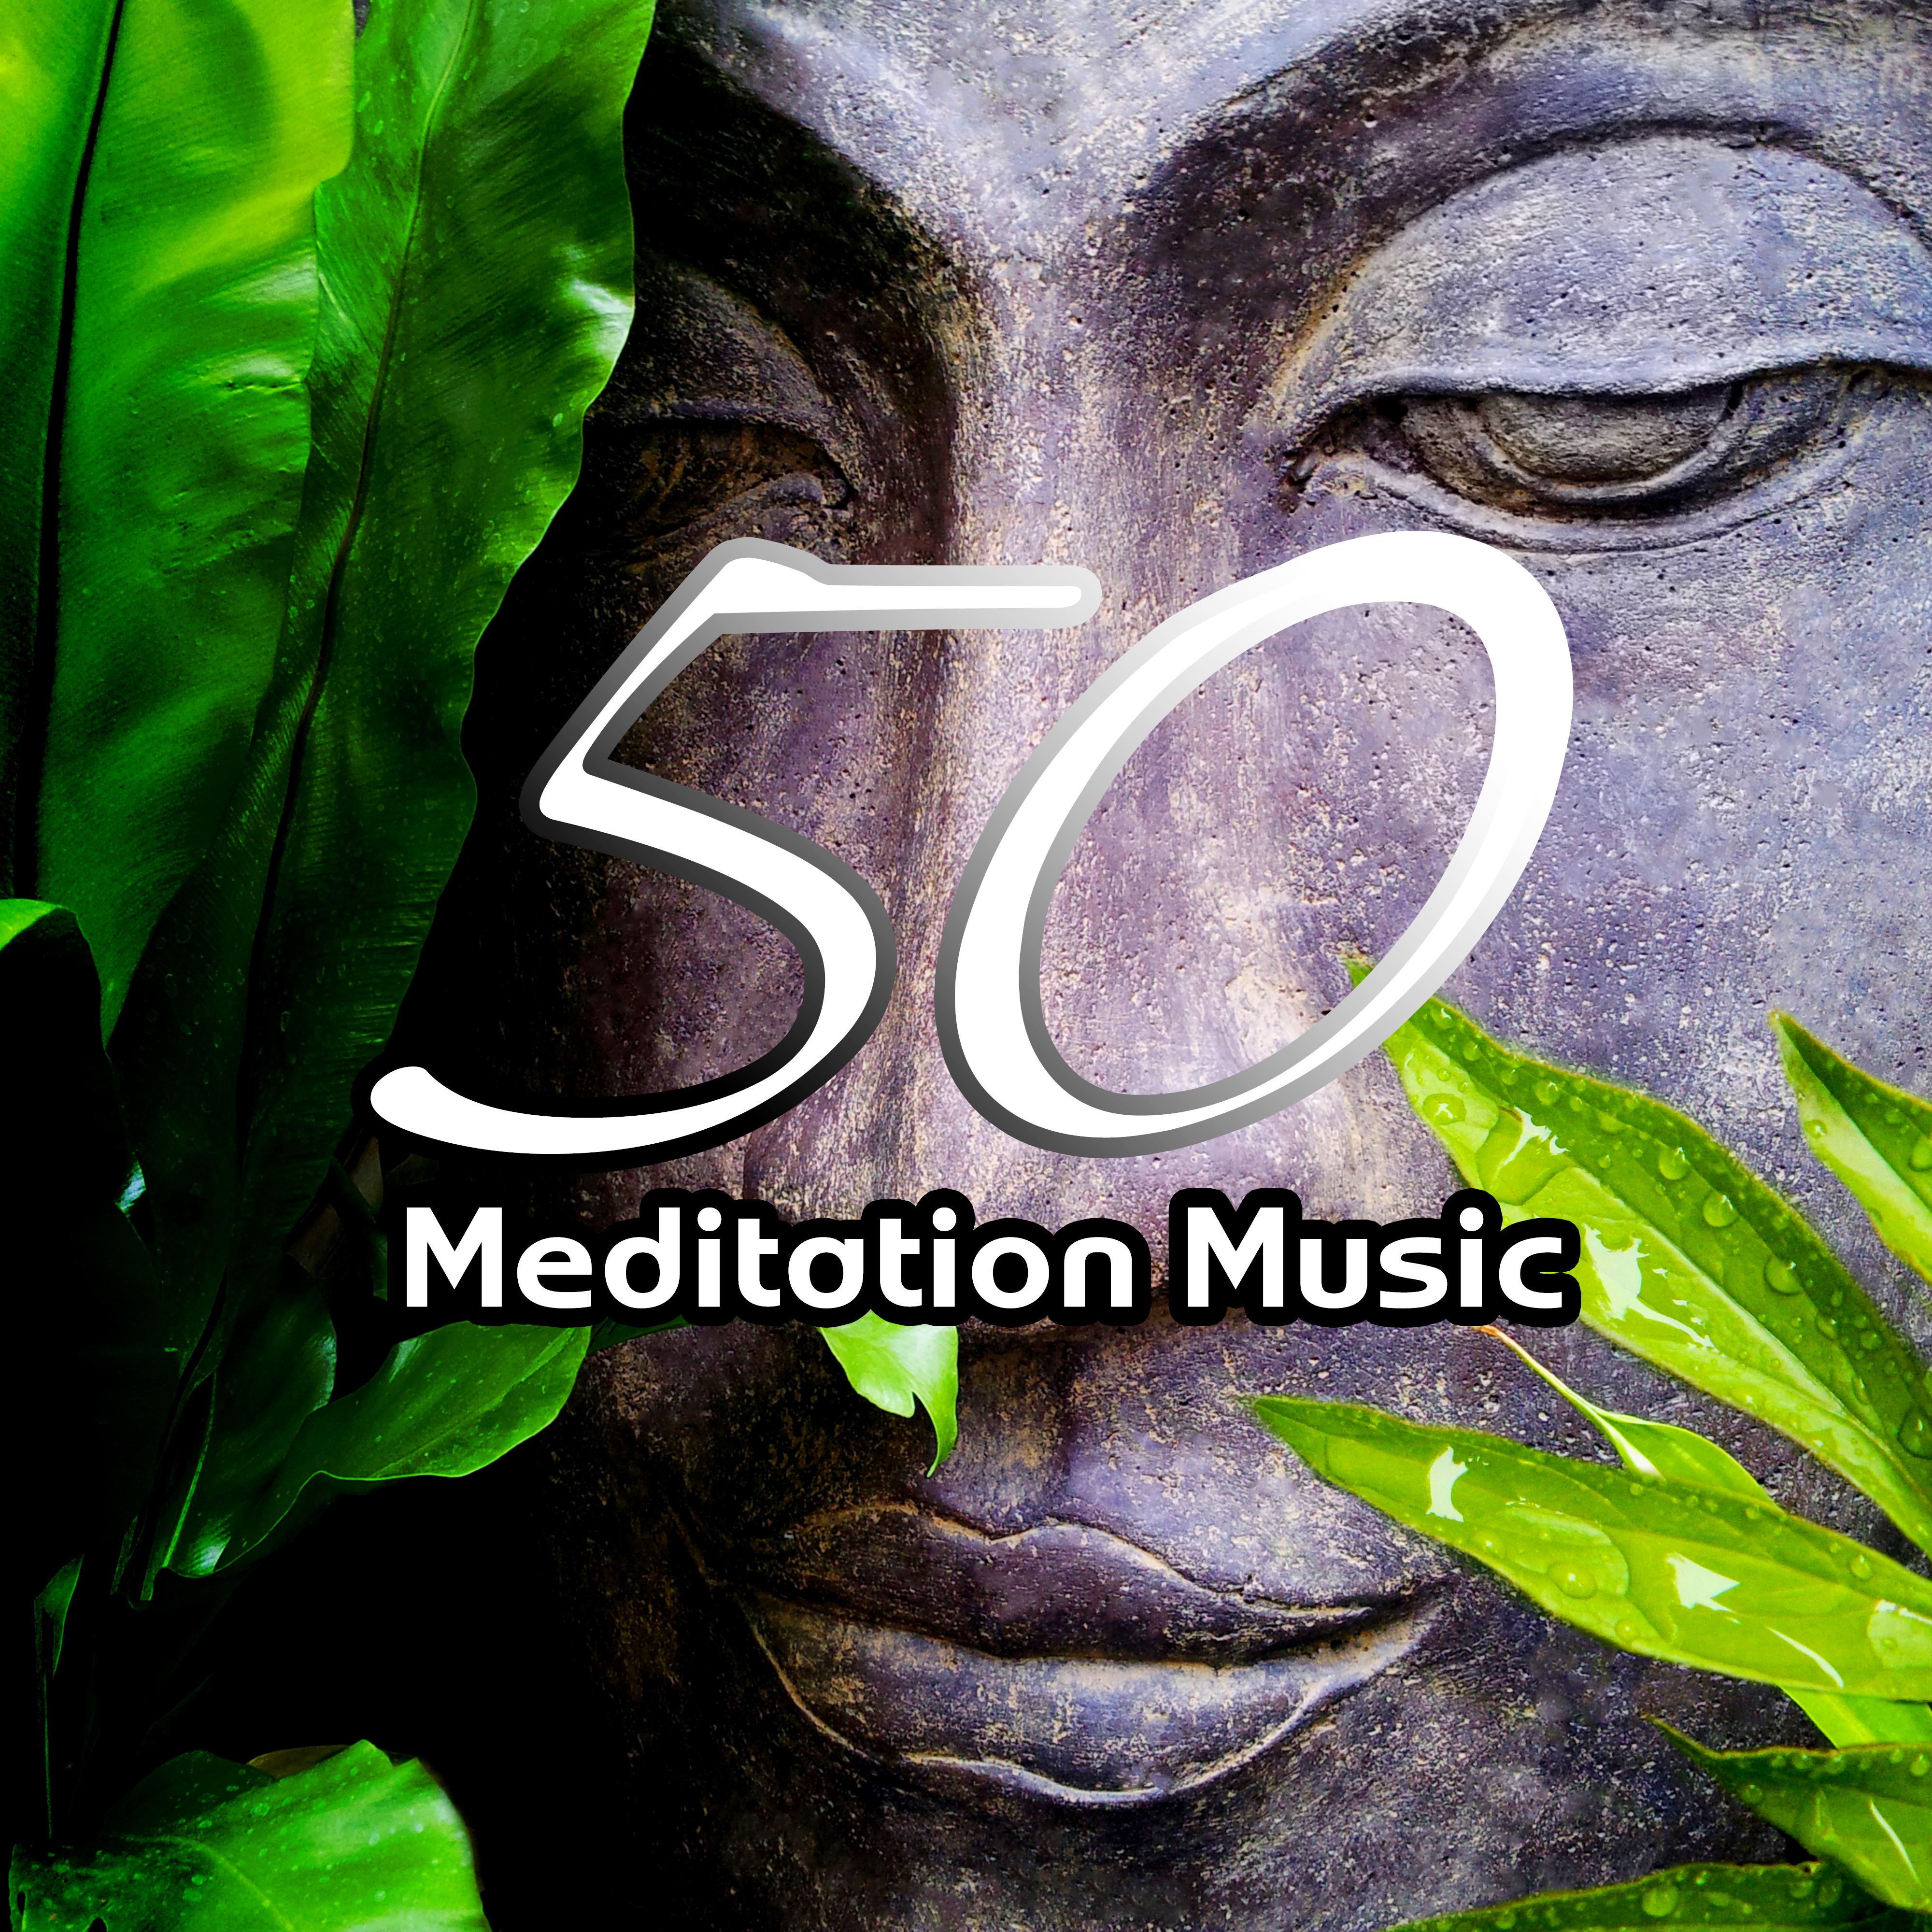 Meditation Music 50  Relaxing Songs for Mindfulness Meditation  Yoga Exercises, Guided Imagery Music, Asian Zen Spa and Massage, Natural White Noise, Sounds of Nature